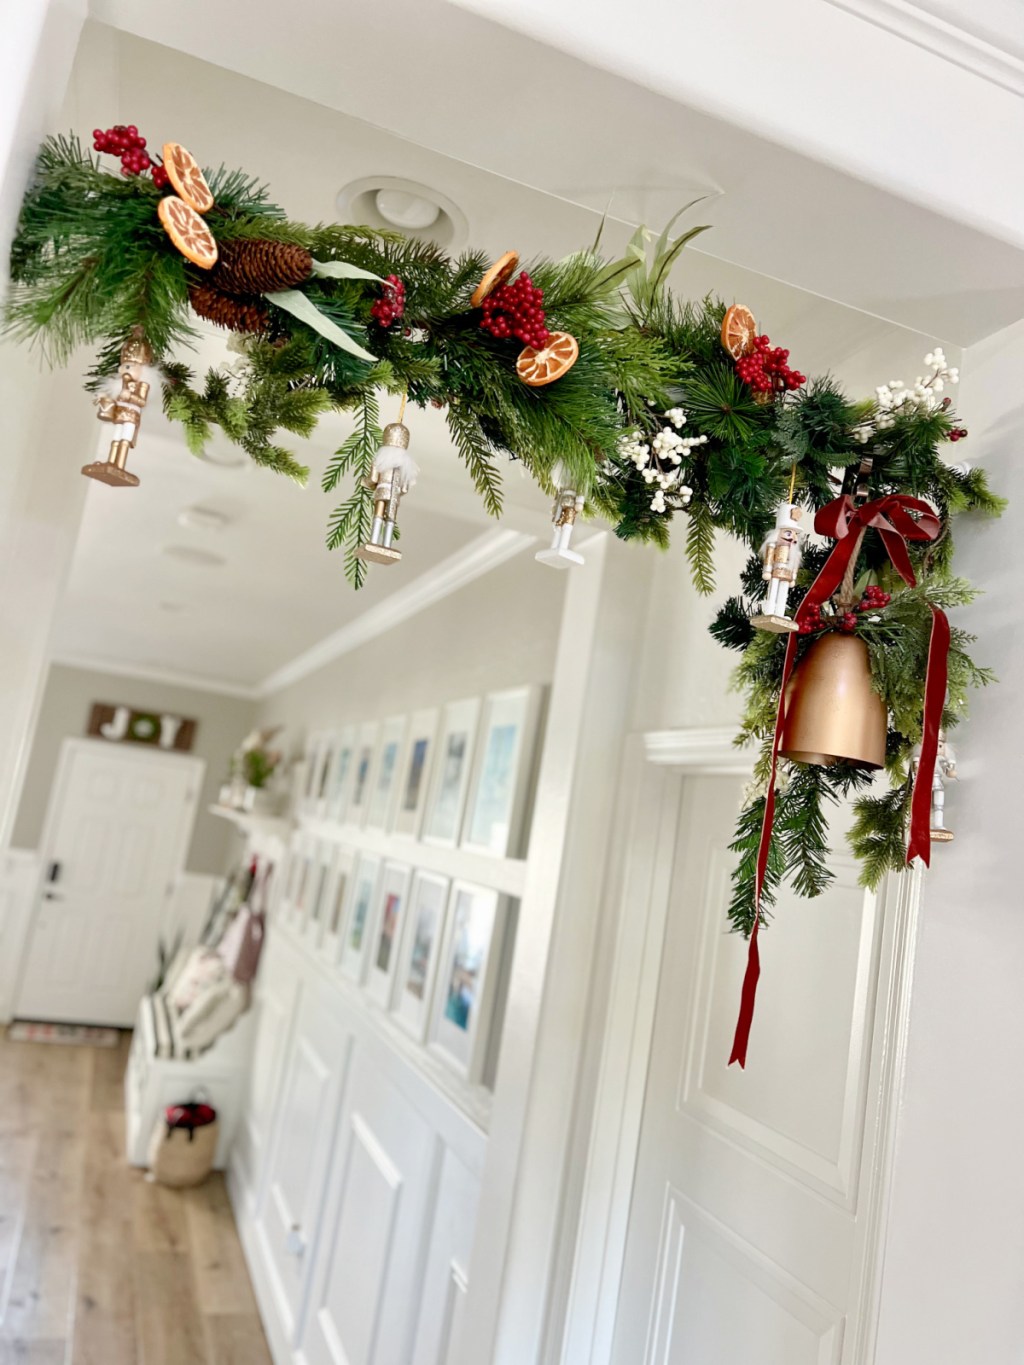 hanging garland in a doorway using a tension rod